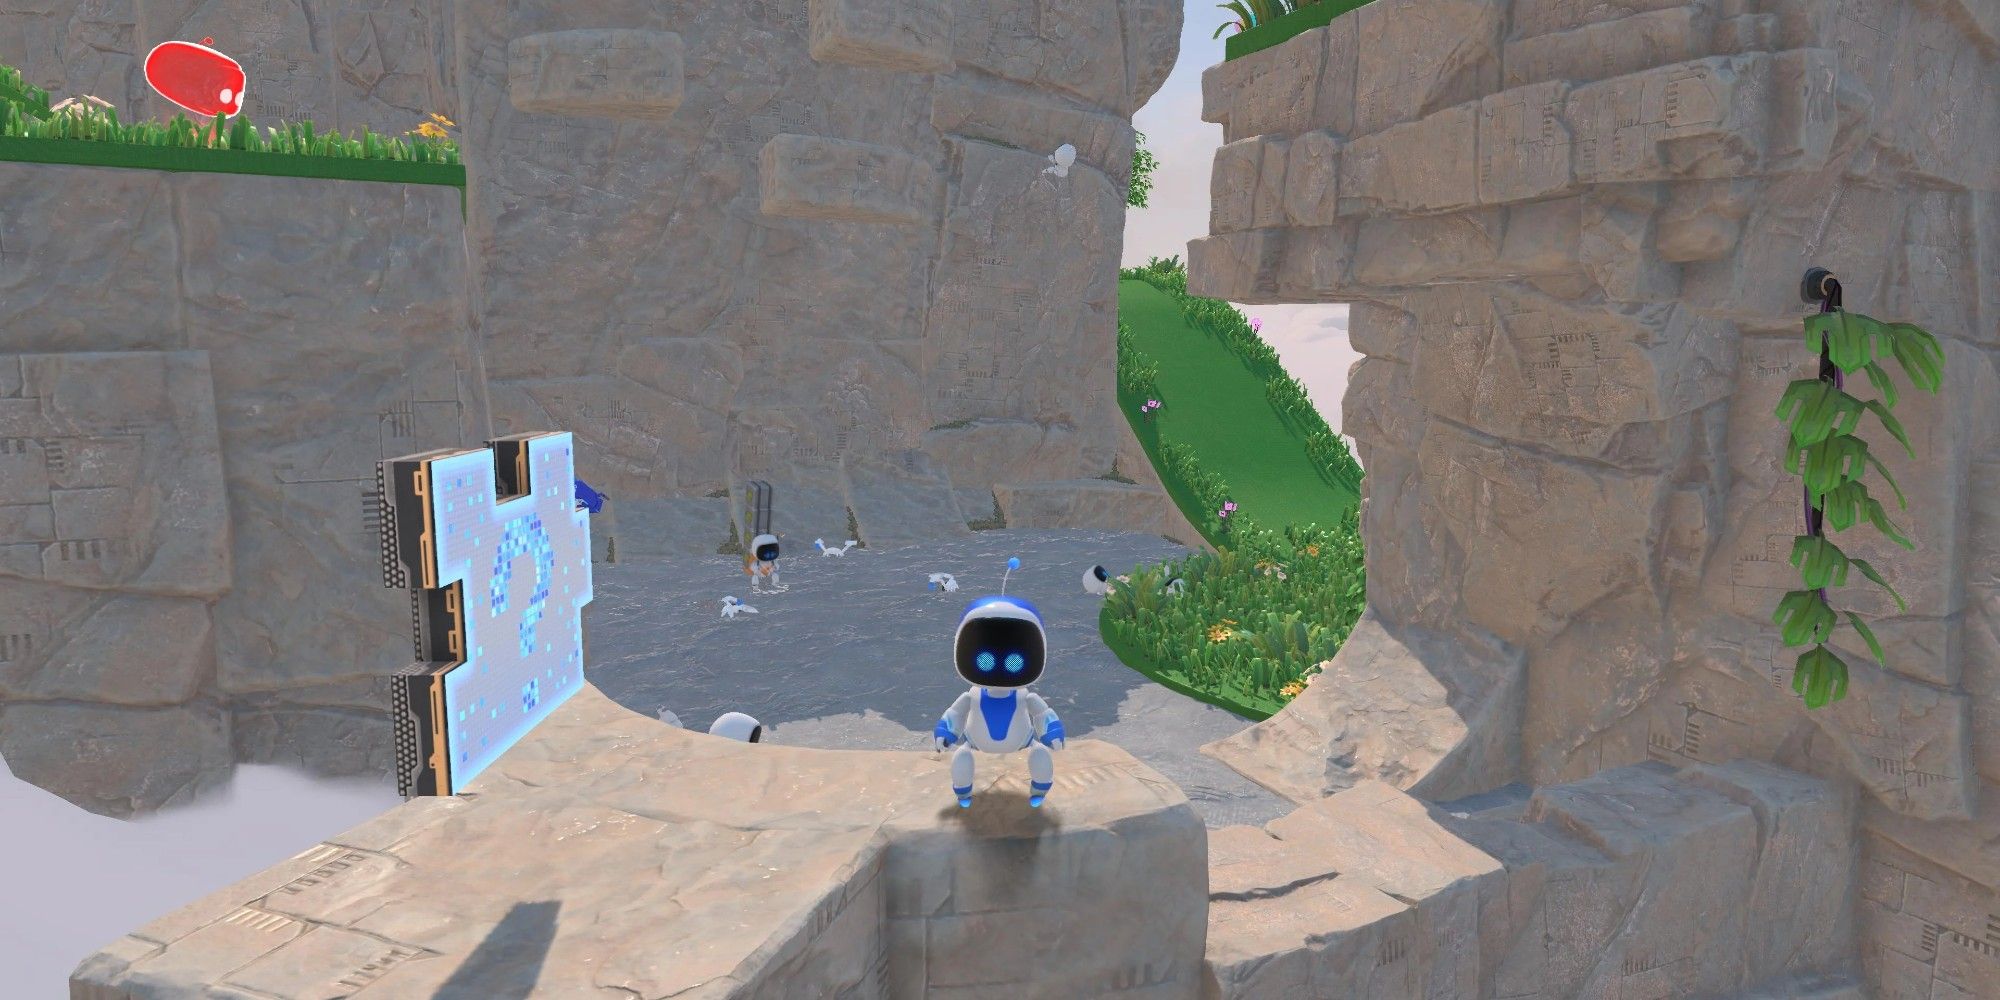 A player climbs stone steps to a puzzle piece in Astro's Playroom